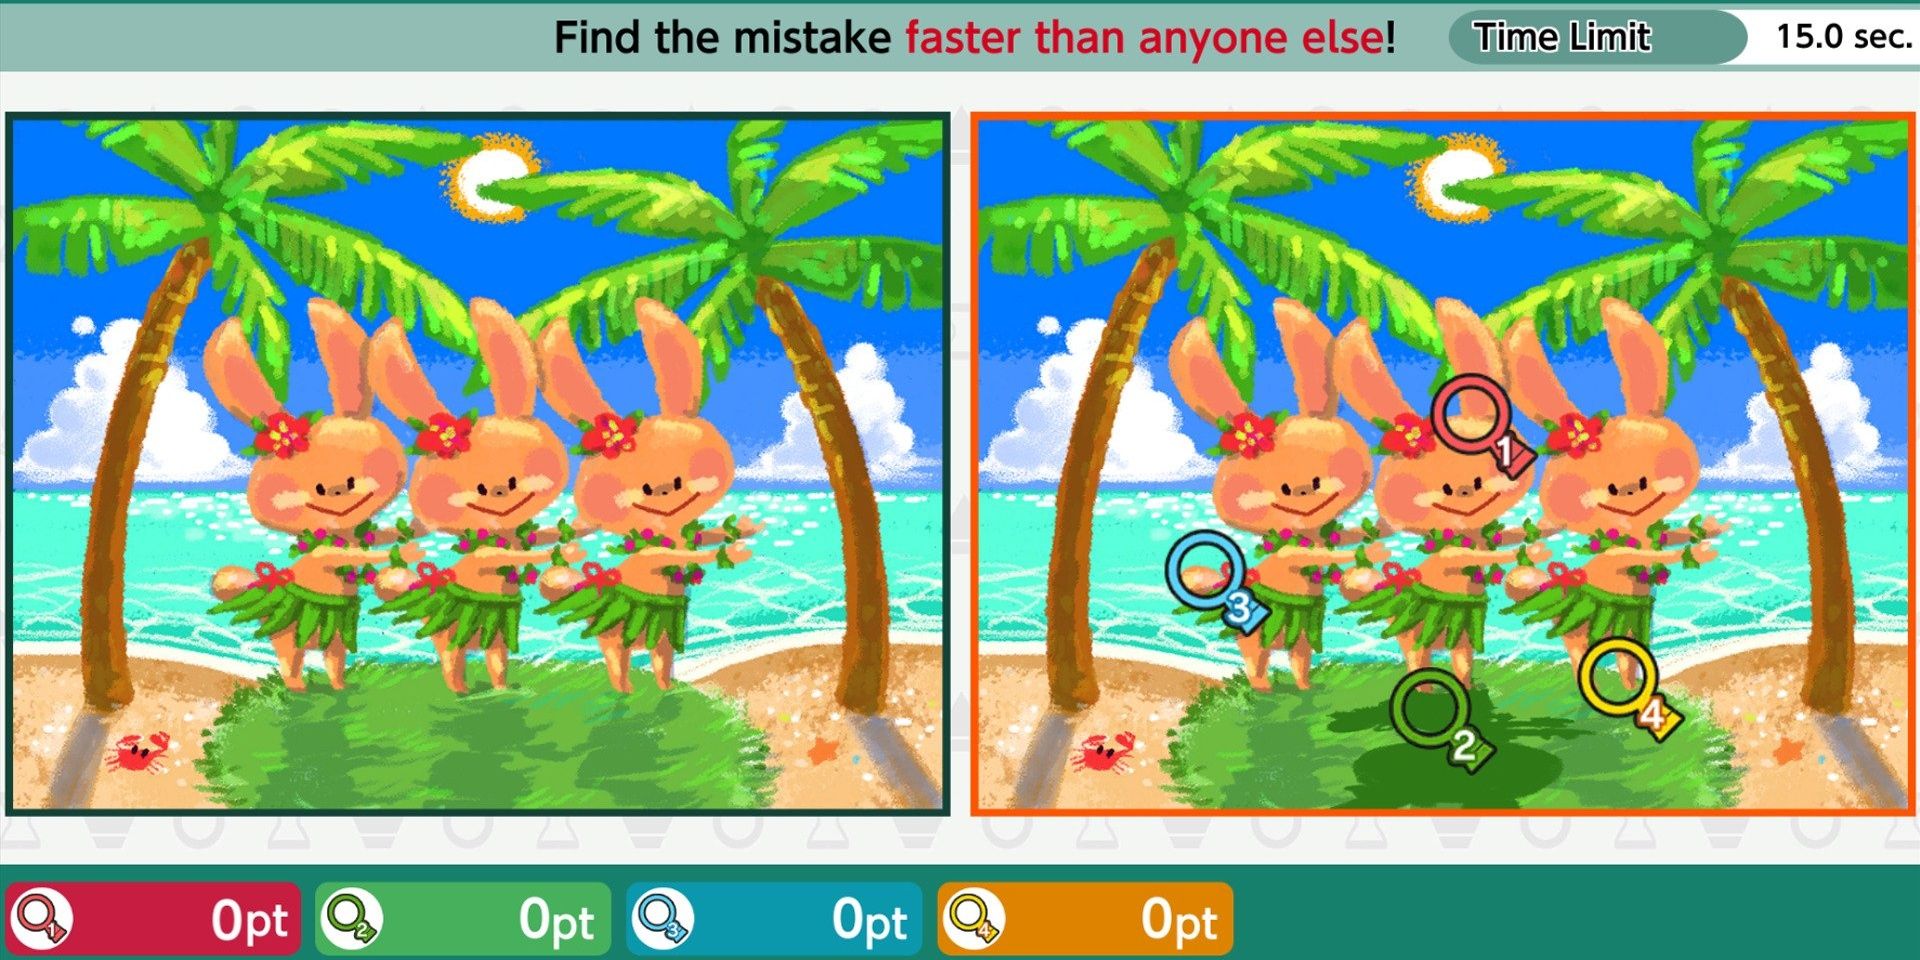 Two images of three rabbits hula-dancing on an island where there are differences between the images and four players have magnifying glasses to find the mistakes in QuickSpot